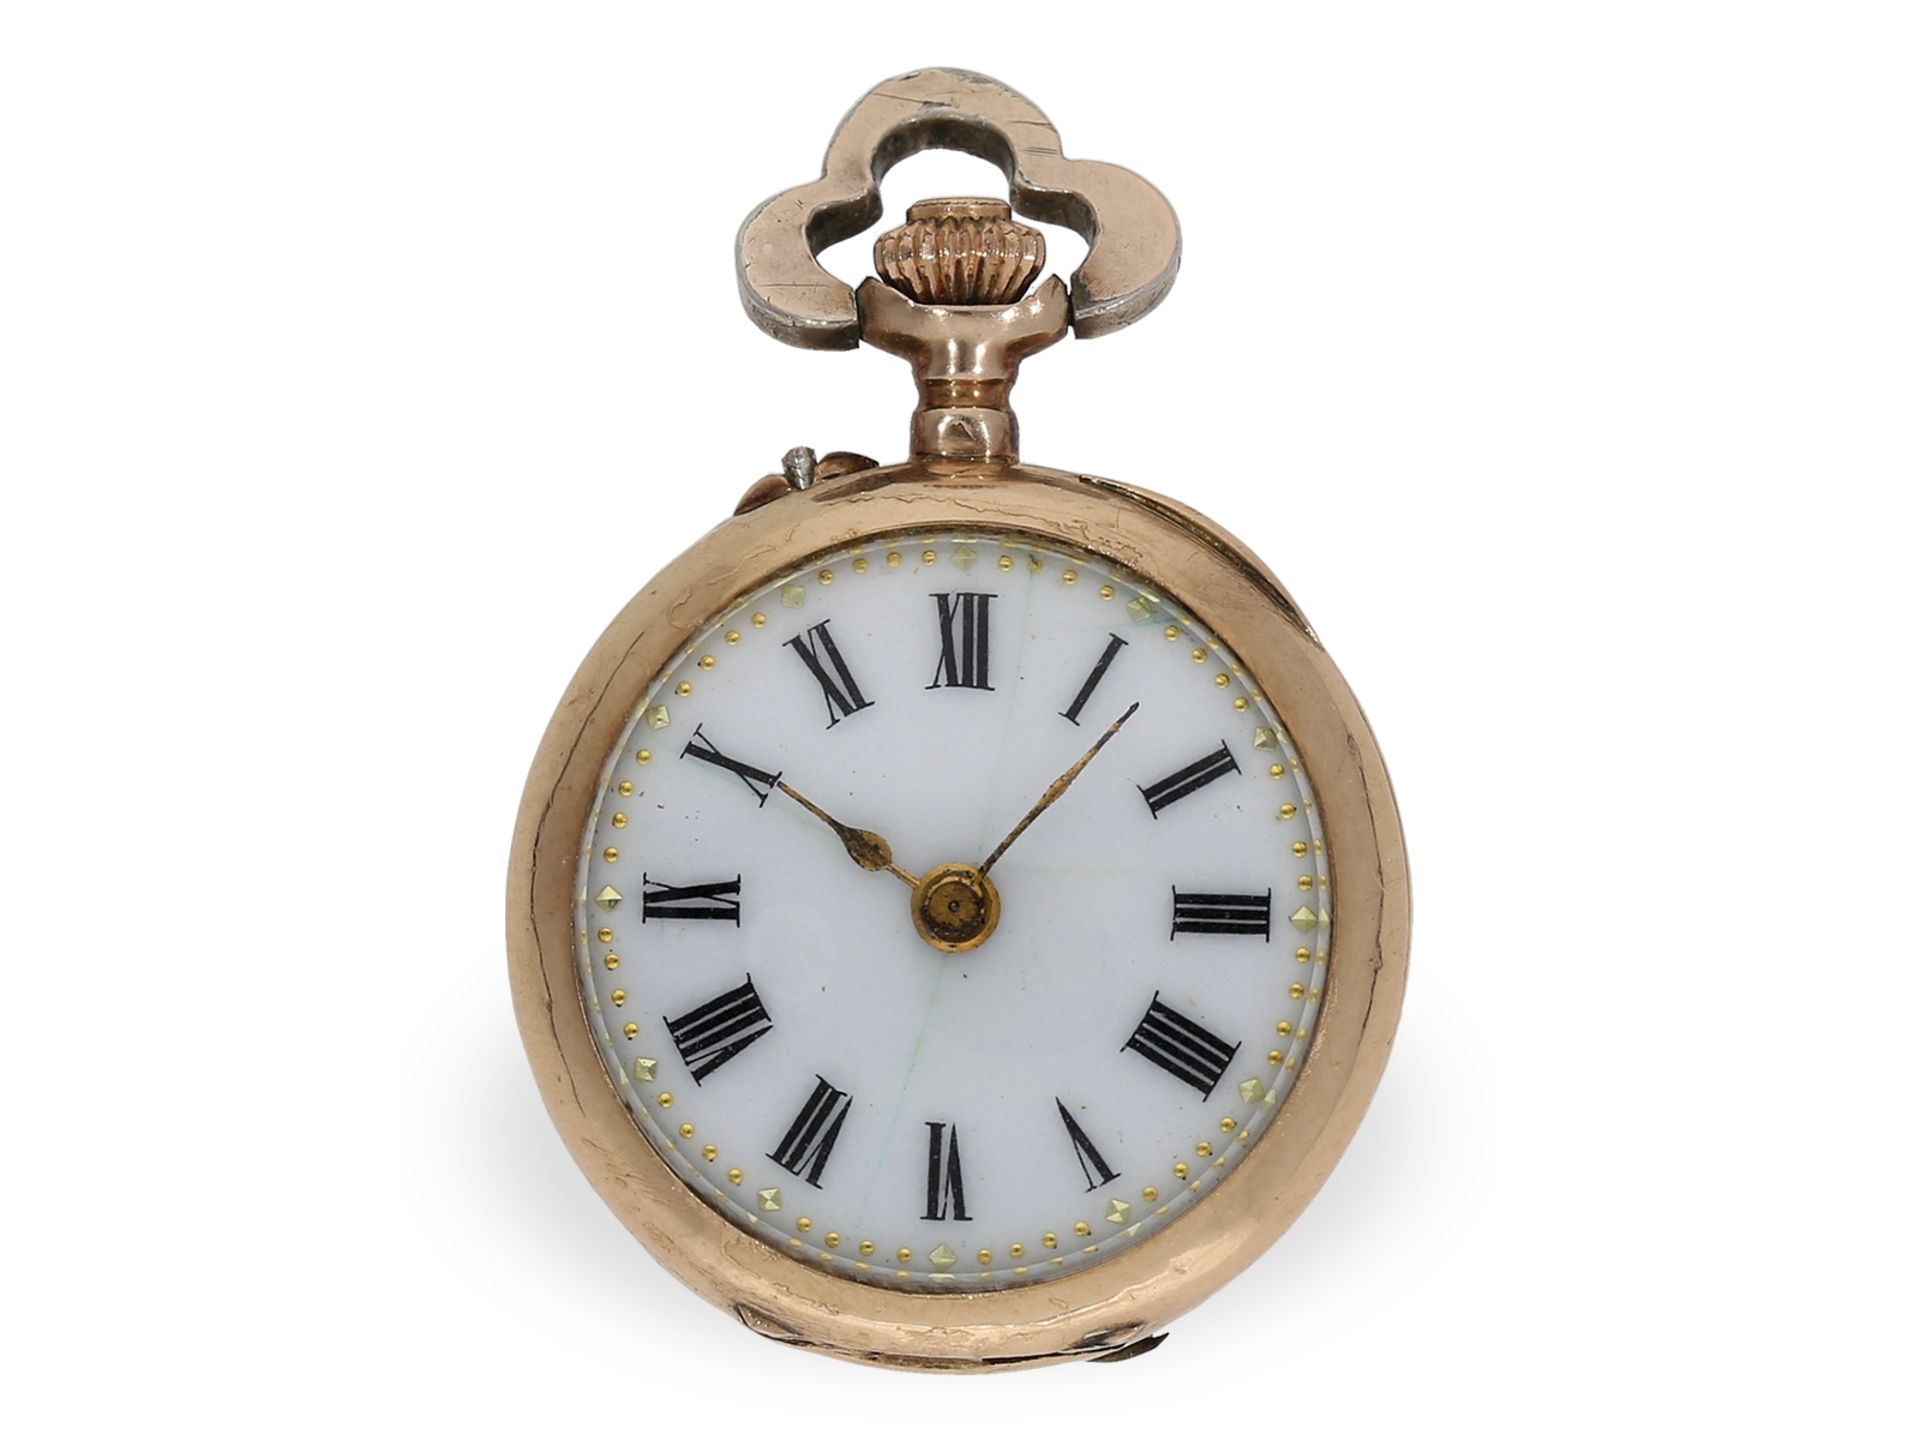 Pocket watch: rarity, miniature ladies' watch with high-quality stone setting, Lattes/ Le Coultre ar - Image 2 of 6